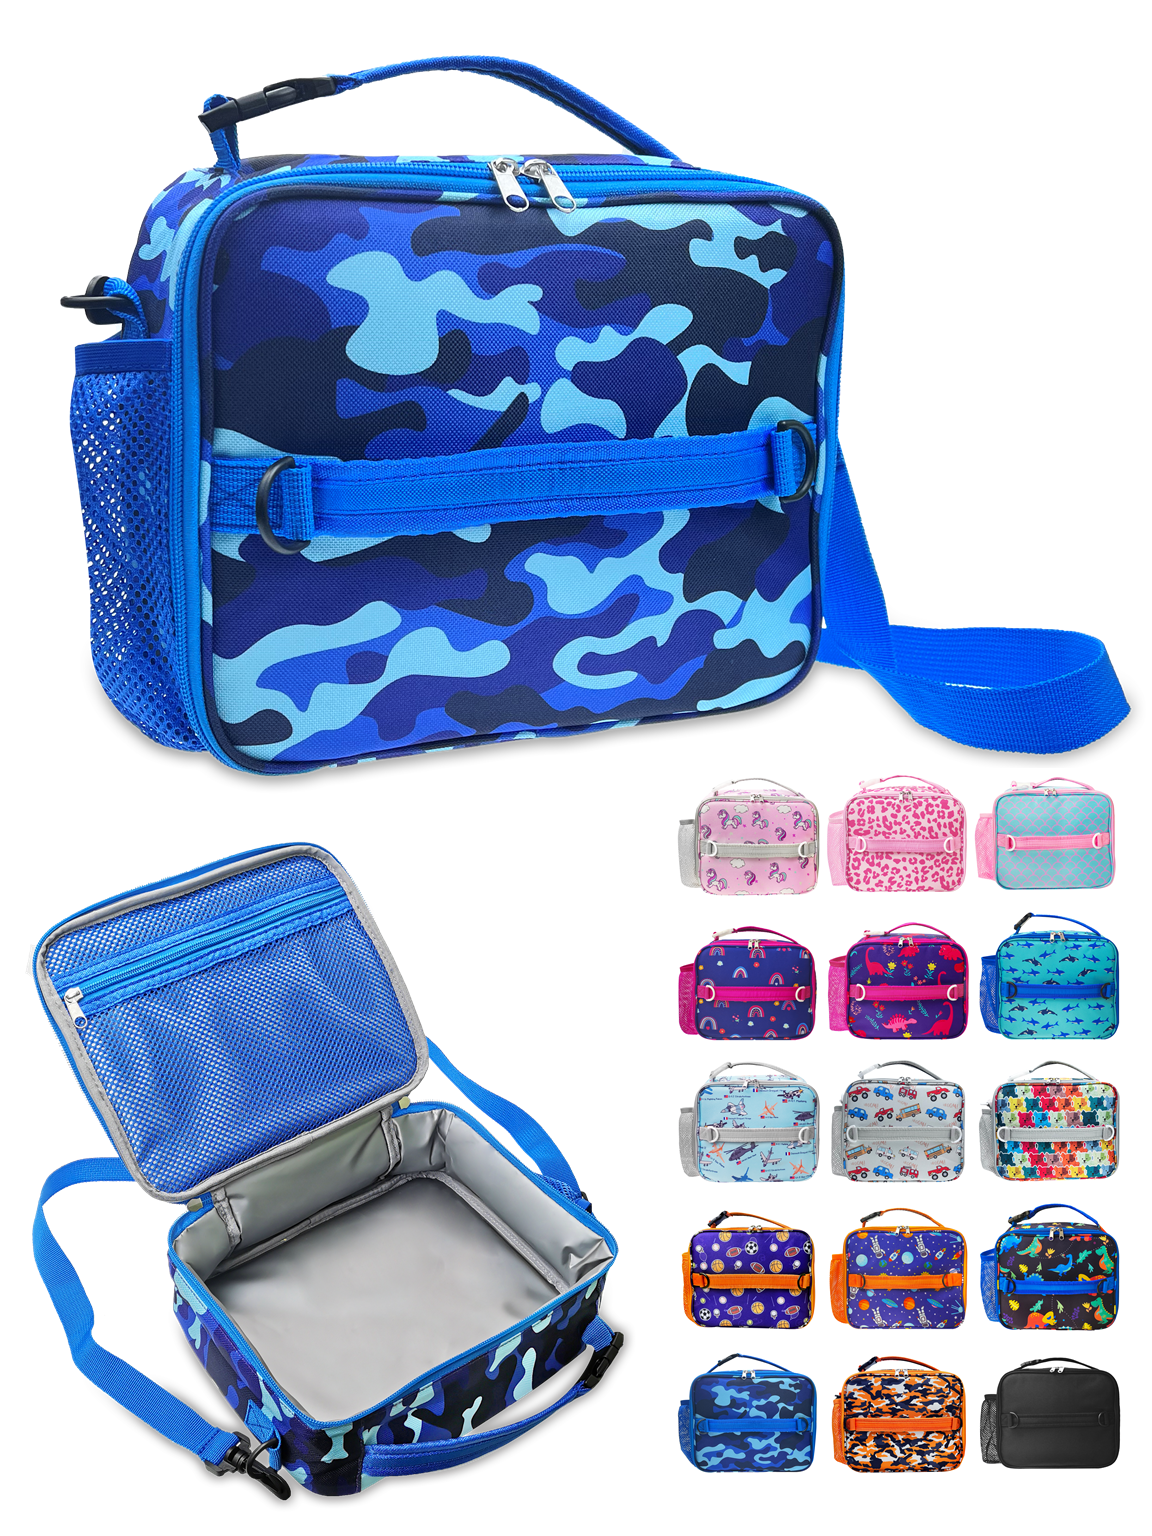 Bixbee Shark Camo Lunchbox - Kids Lunch Box, Insulated Lunch Bag for Girls  and Boys, Lunch Boxes Kids for School, Small Lunch Tote for Toddlers